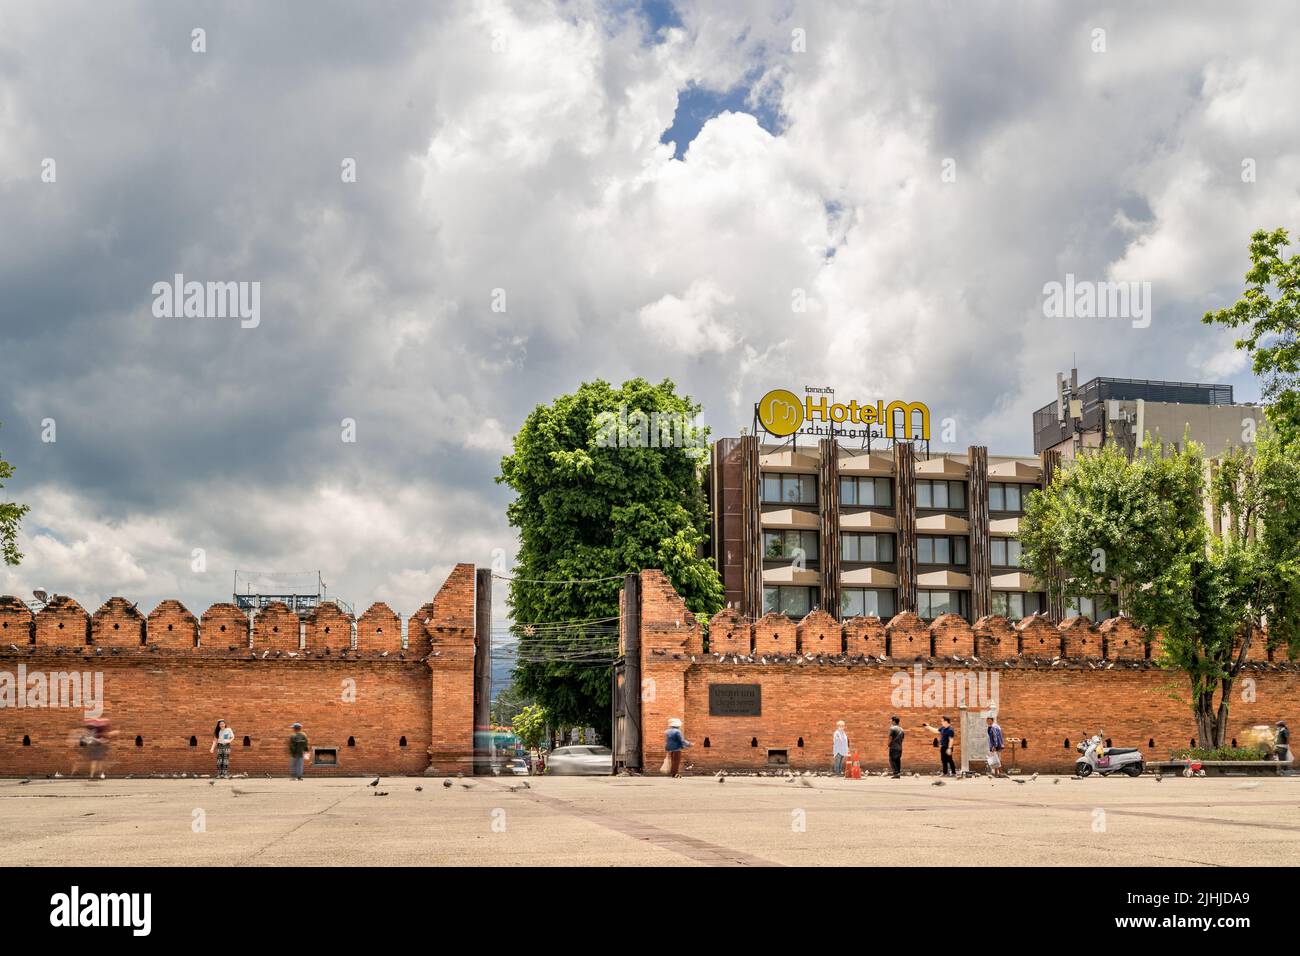 Chiang Mai, Thailand - 18 July 2022 - Time lapse view of the famous tourist location Tha Phae Gate in Chiang Mai, Thailand Stock Photo